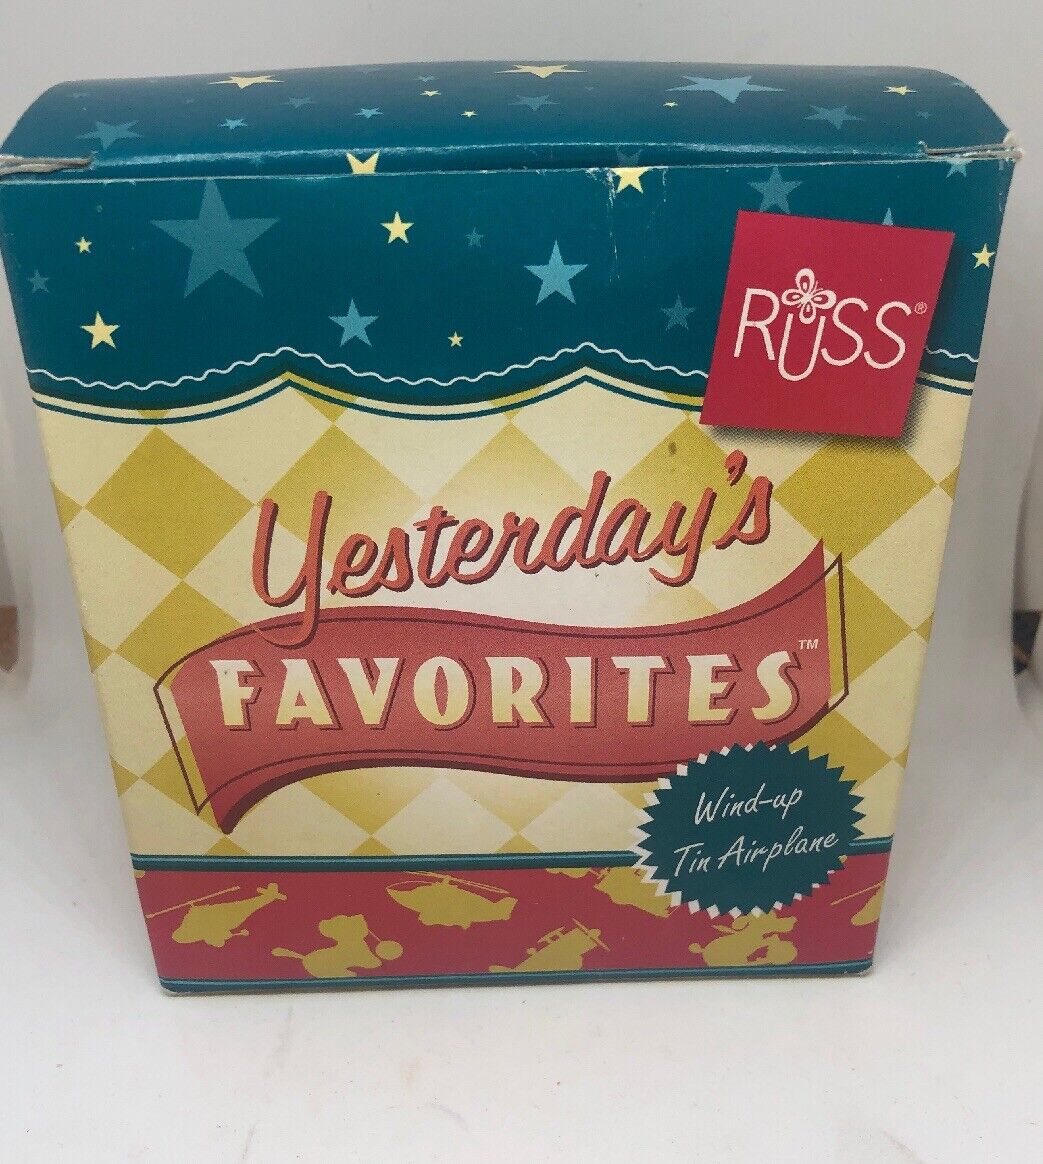 Russ Yesterday's Favorites Wind-up Tin Airplane Red Side Panel